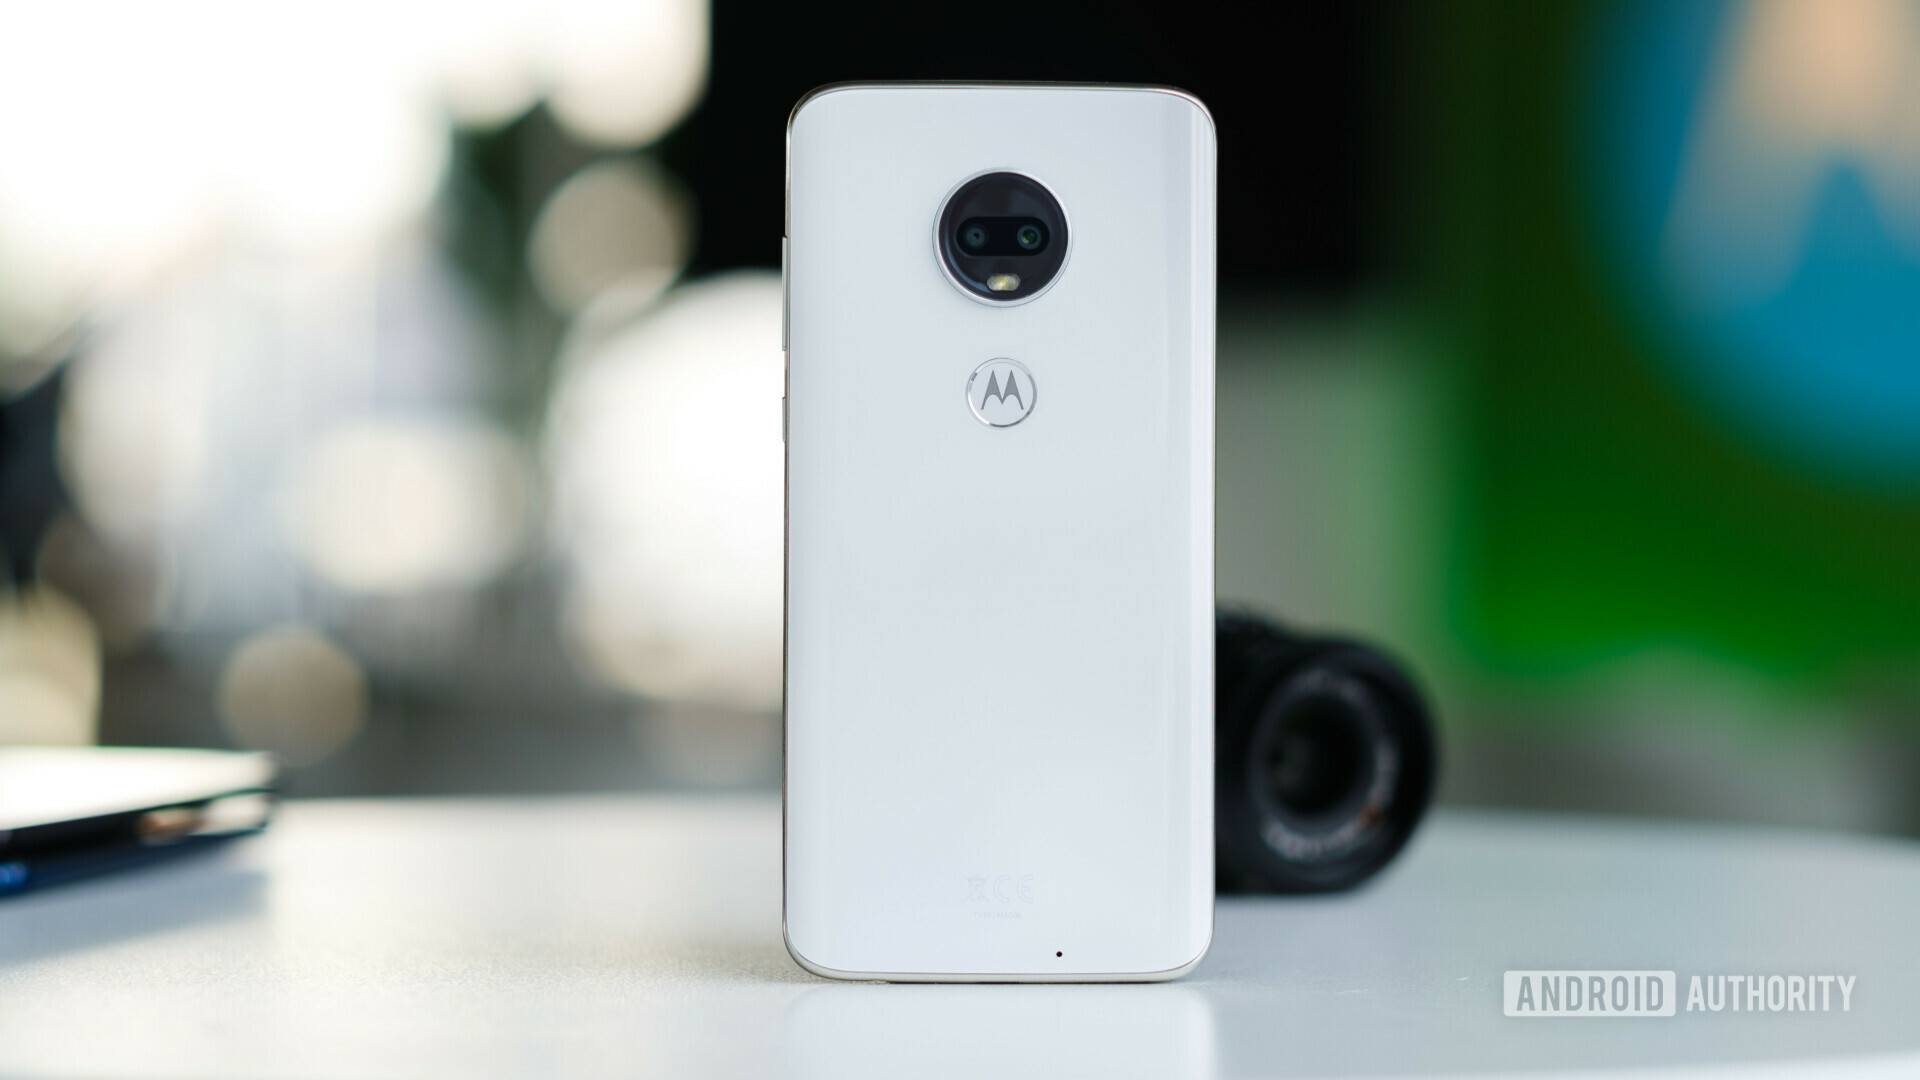 Back side of the new Motorola Moto G7 in white color standing upright on a desk.